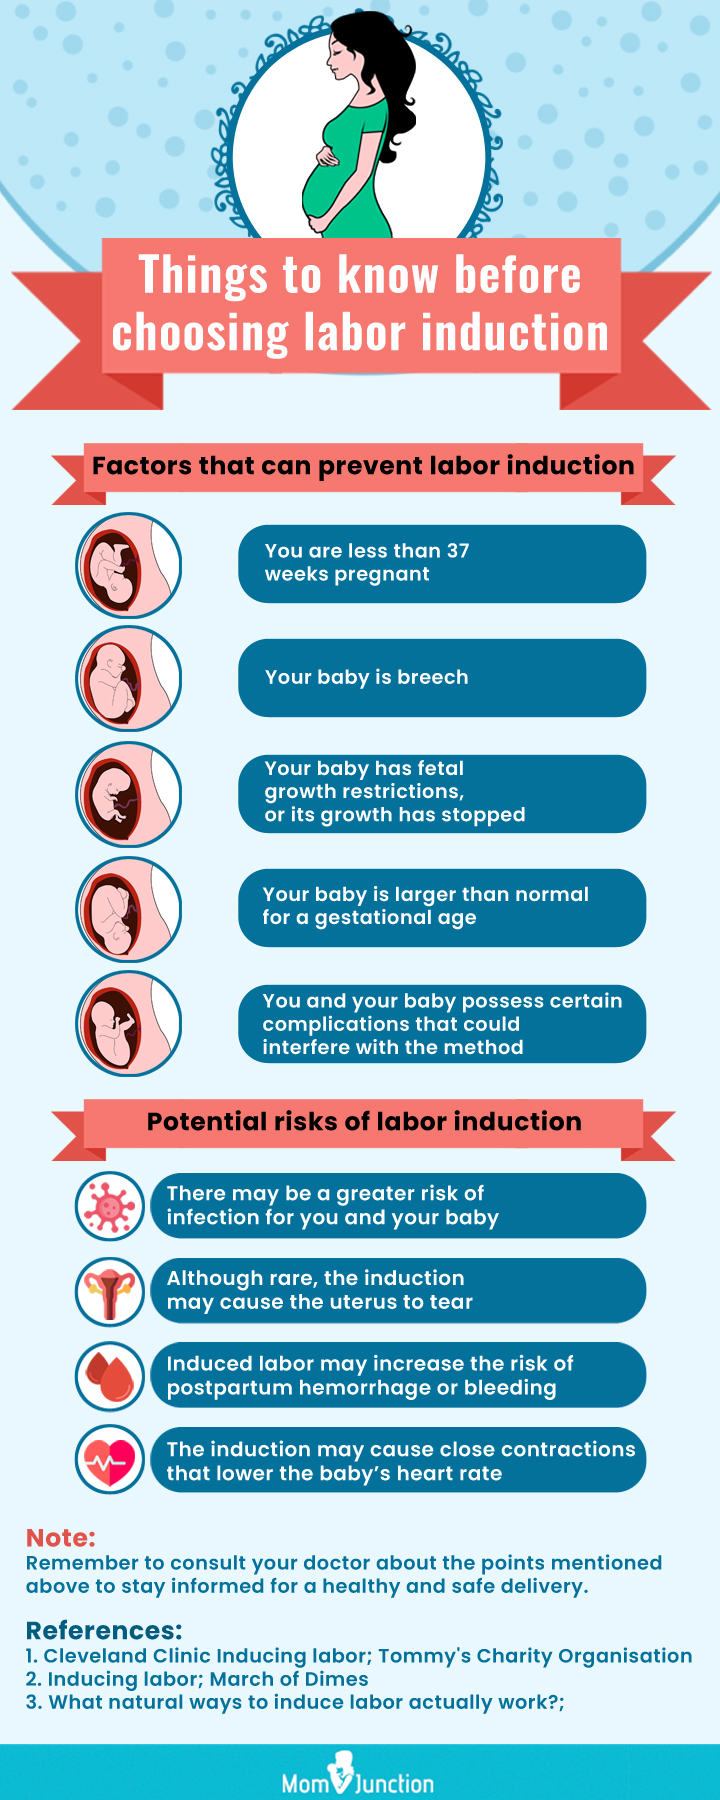 10 natural and effective ways to induce labor at home (infographic)